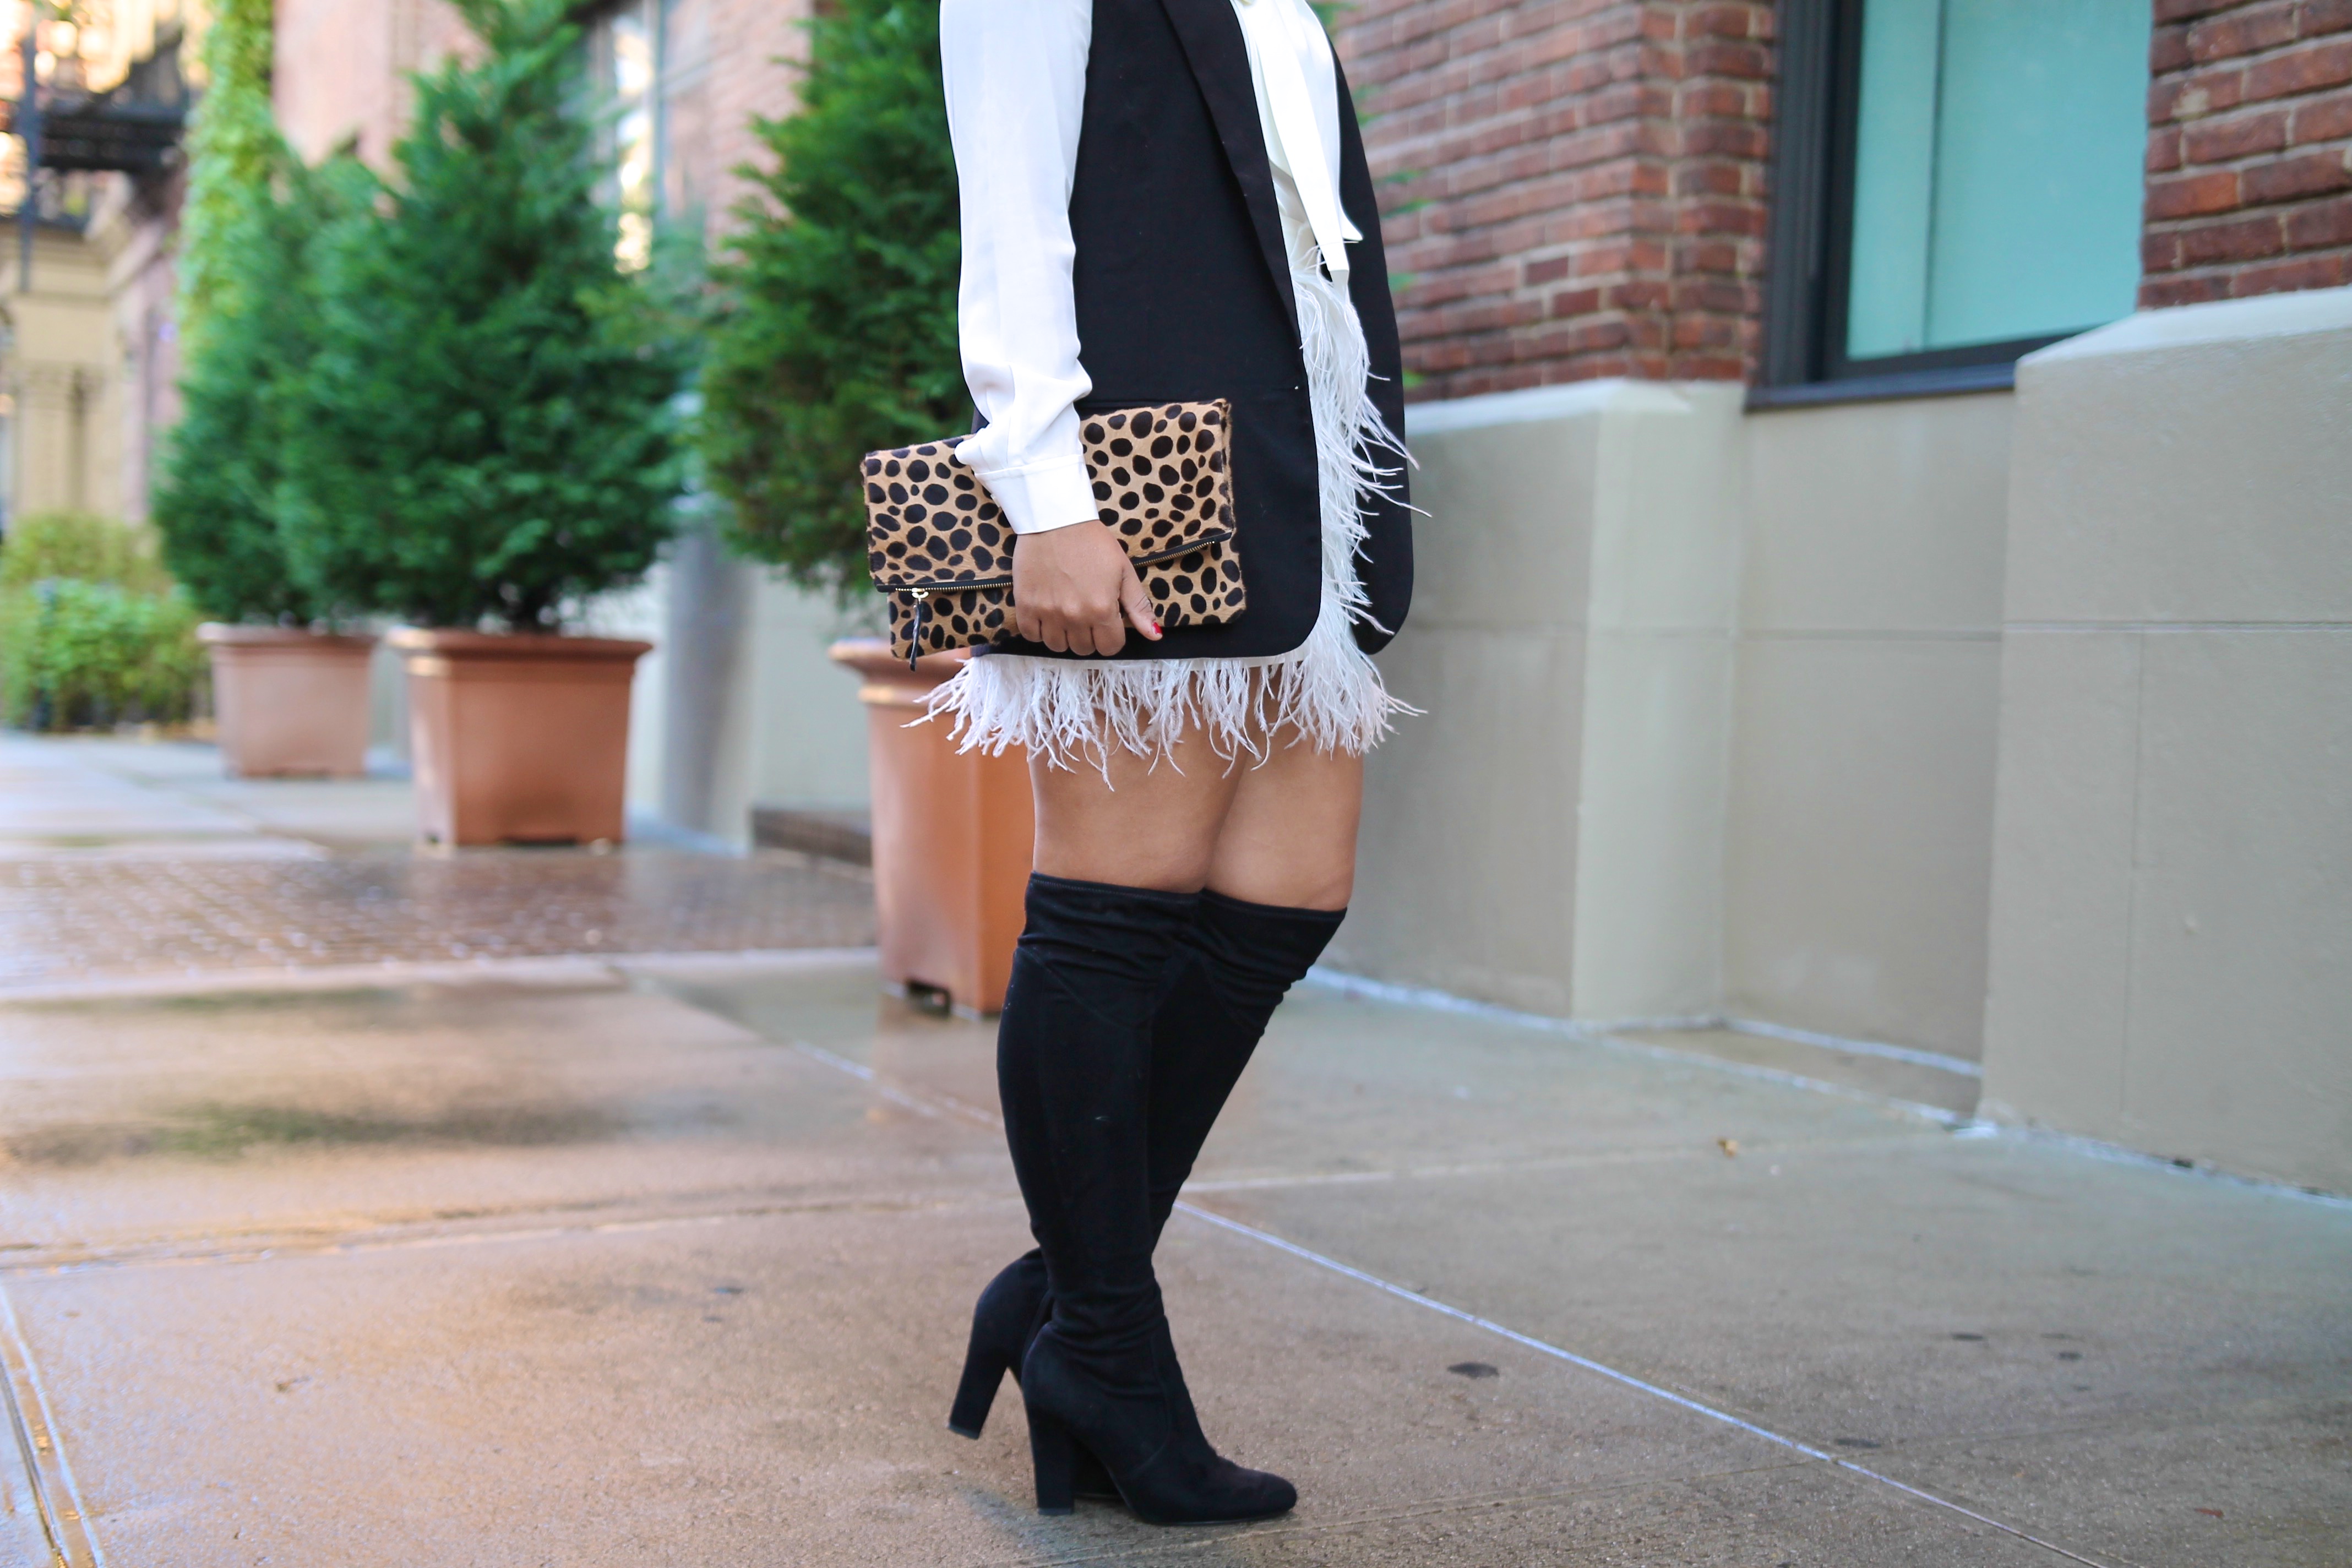 Holiday Style - White Feather Skirt / Bow Blouse / Leopard Clutch / Over the Knee Boots 